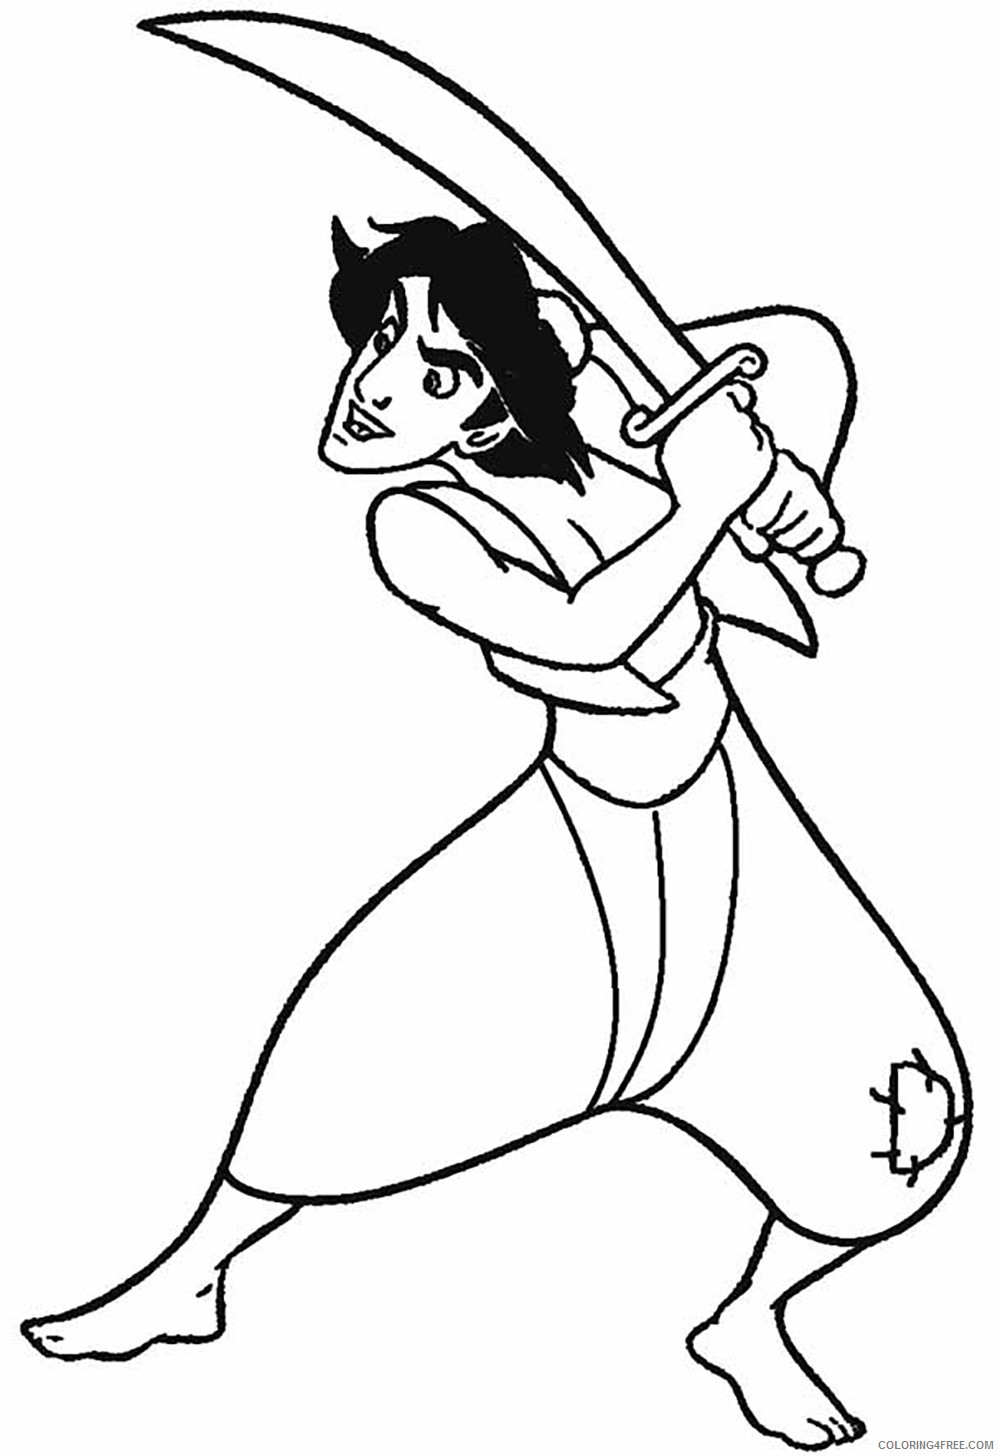 aladdin coloring pages holding sword Coloring4free